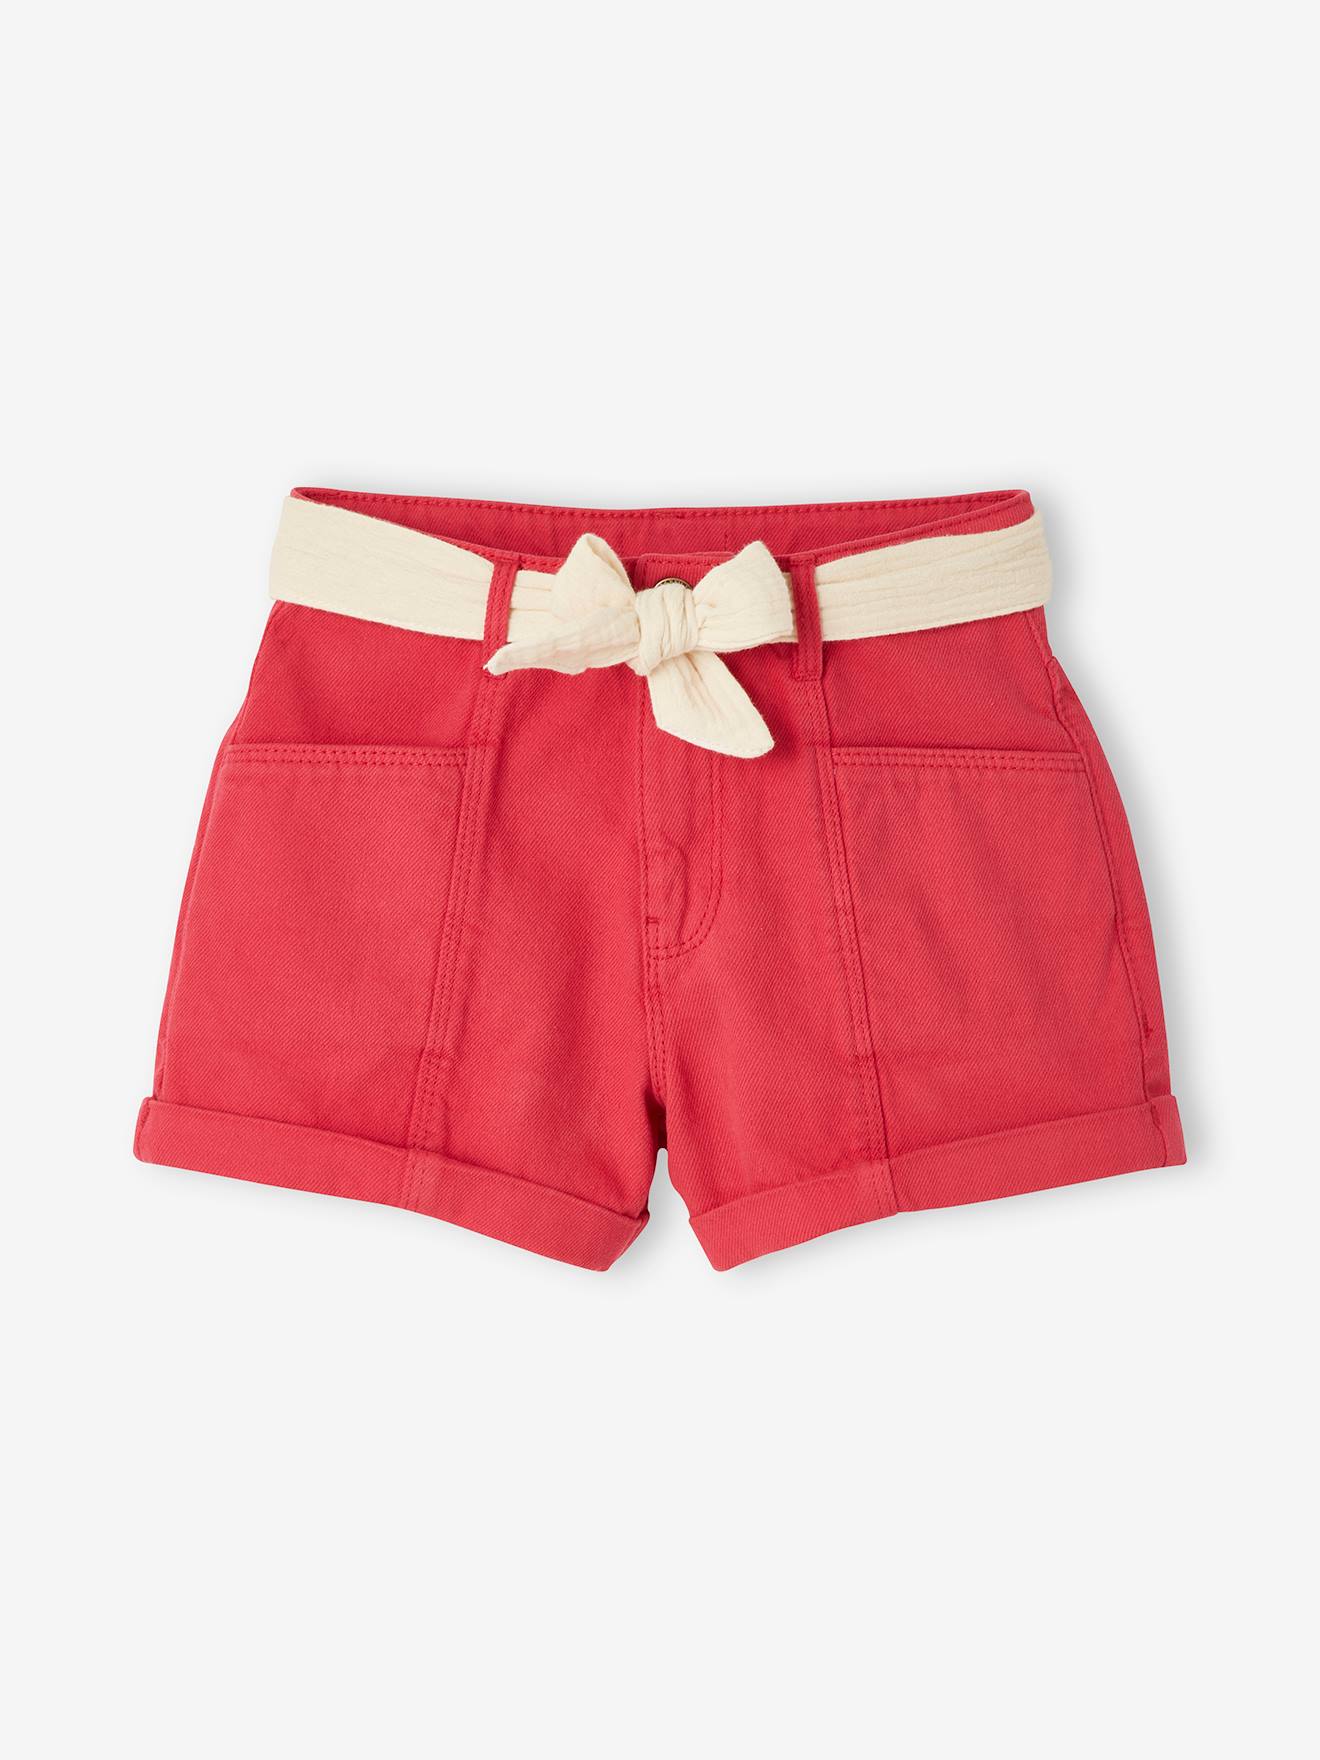 Baby Menagerry Curiosity Cotton Gauze Shorts with Tie Belt, for Girls - pink dark solid, Girls